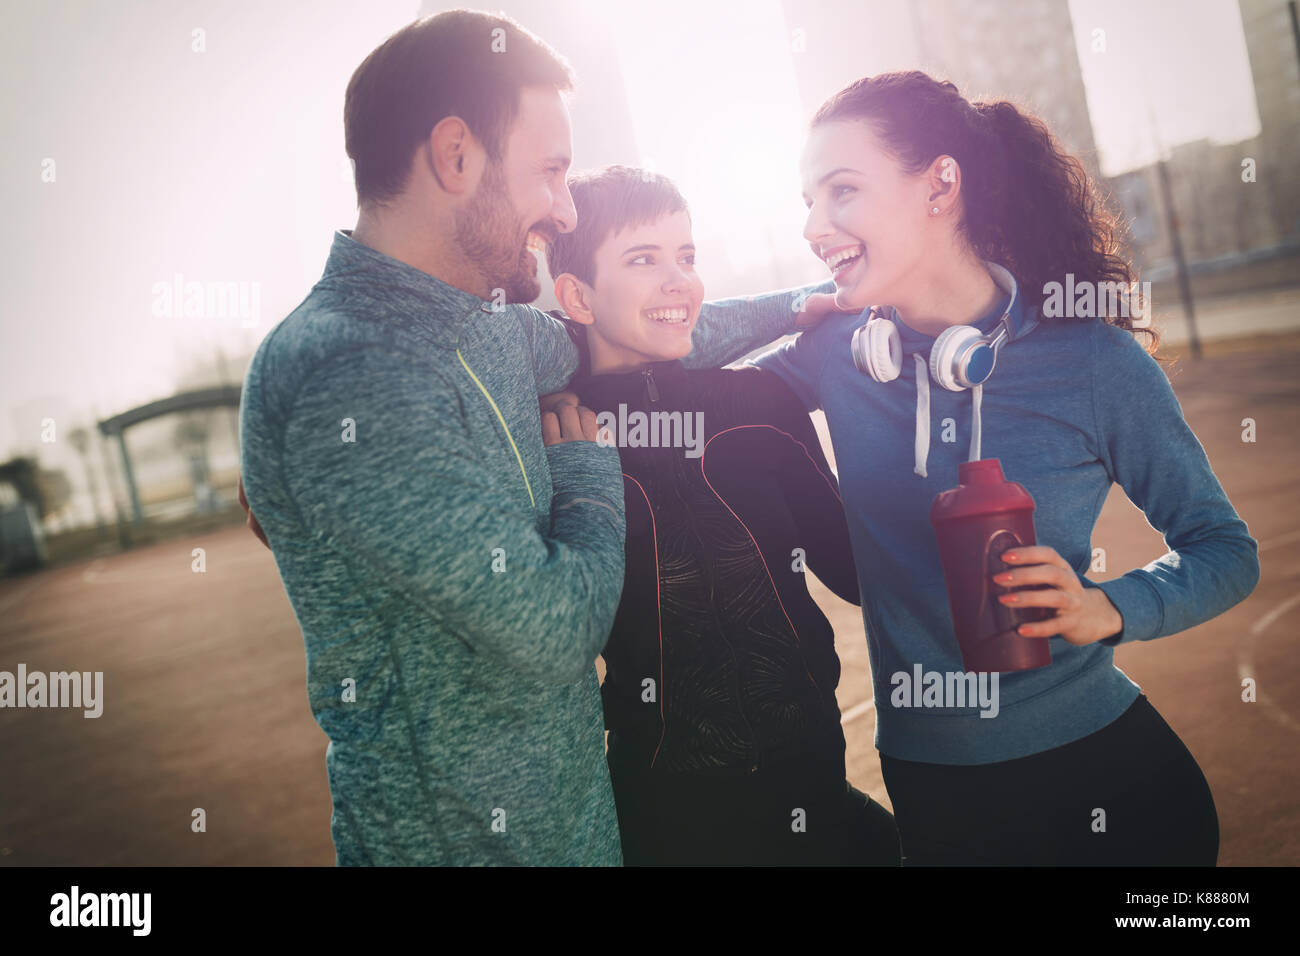 Friends fitness training together outdoors living active healthy Stock Photo